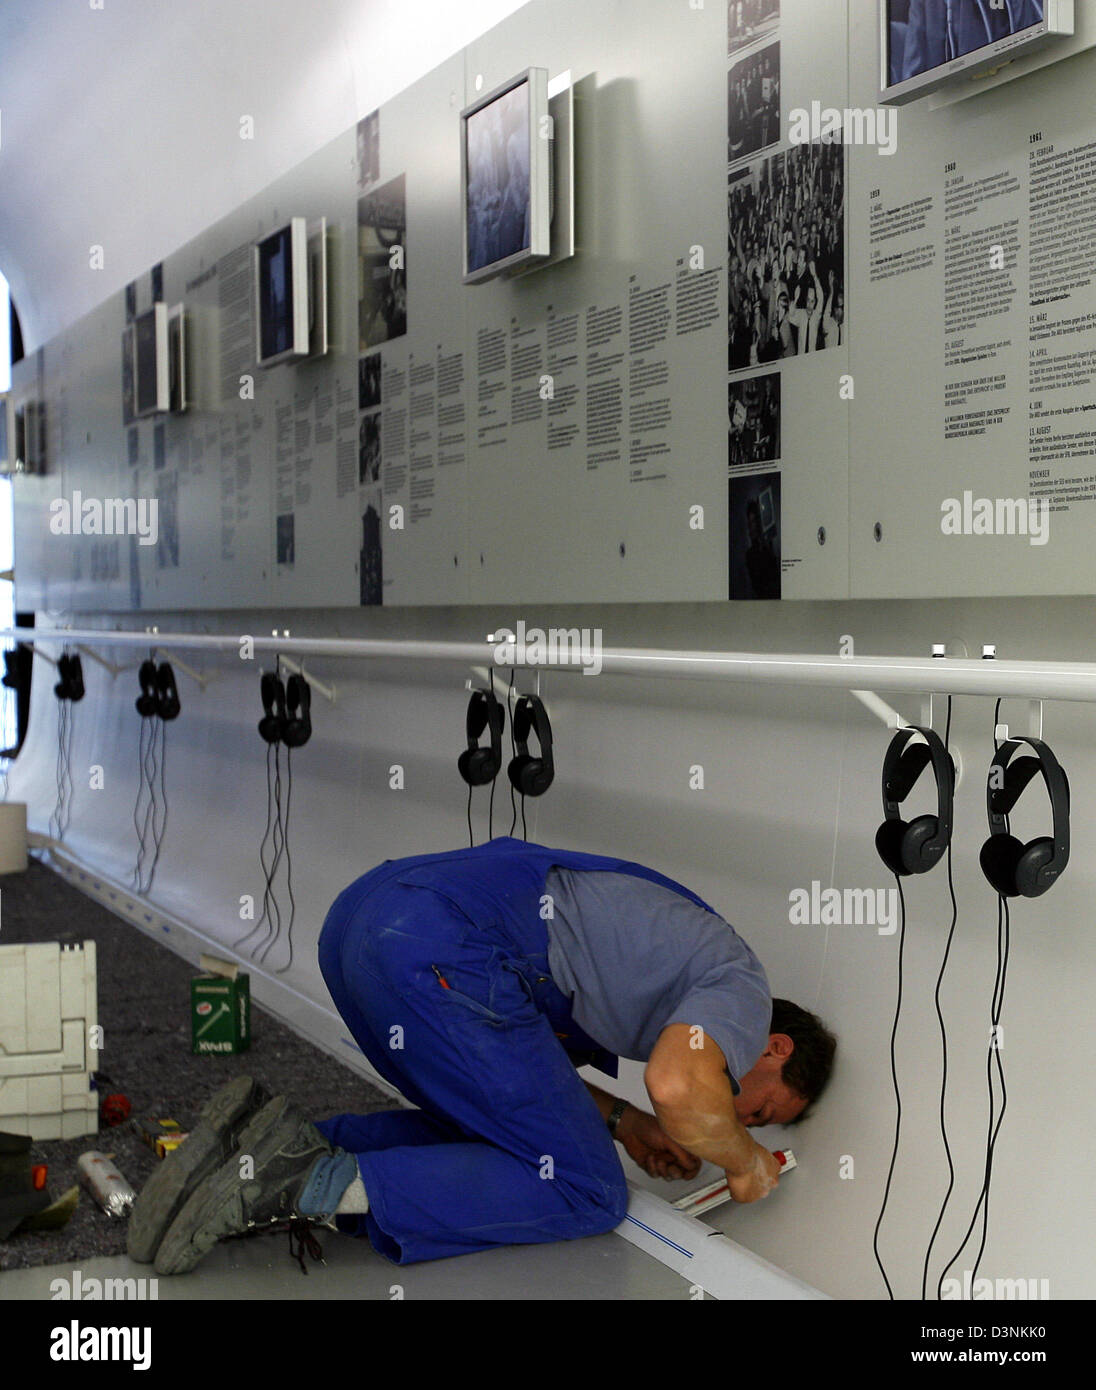 An electrician installs headphones to an information desk of the new German Television Museum at the Potsdamer square in Berlin, Germany, Tuesday, 30 May 2006. The permanent exhibition gives a view on 53 years of television history in both parts of Germany. After 20 years of preperations the museum opens its gates in the film house of the Sony Centre on Thursday, 1 June. Photo: Wol Stock Photo